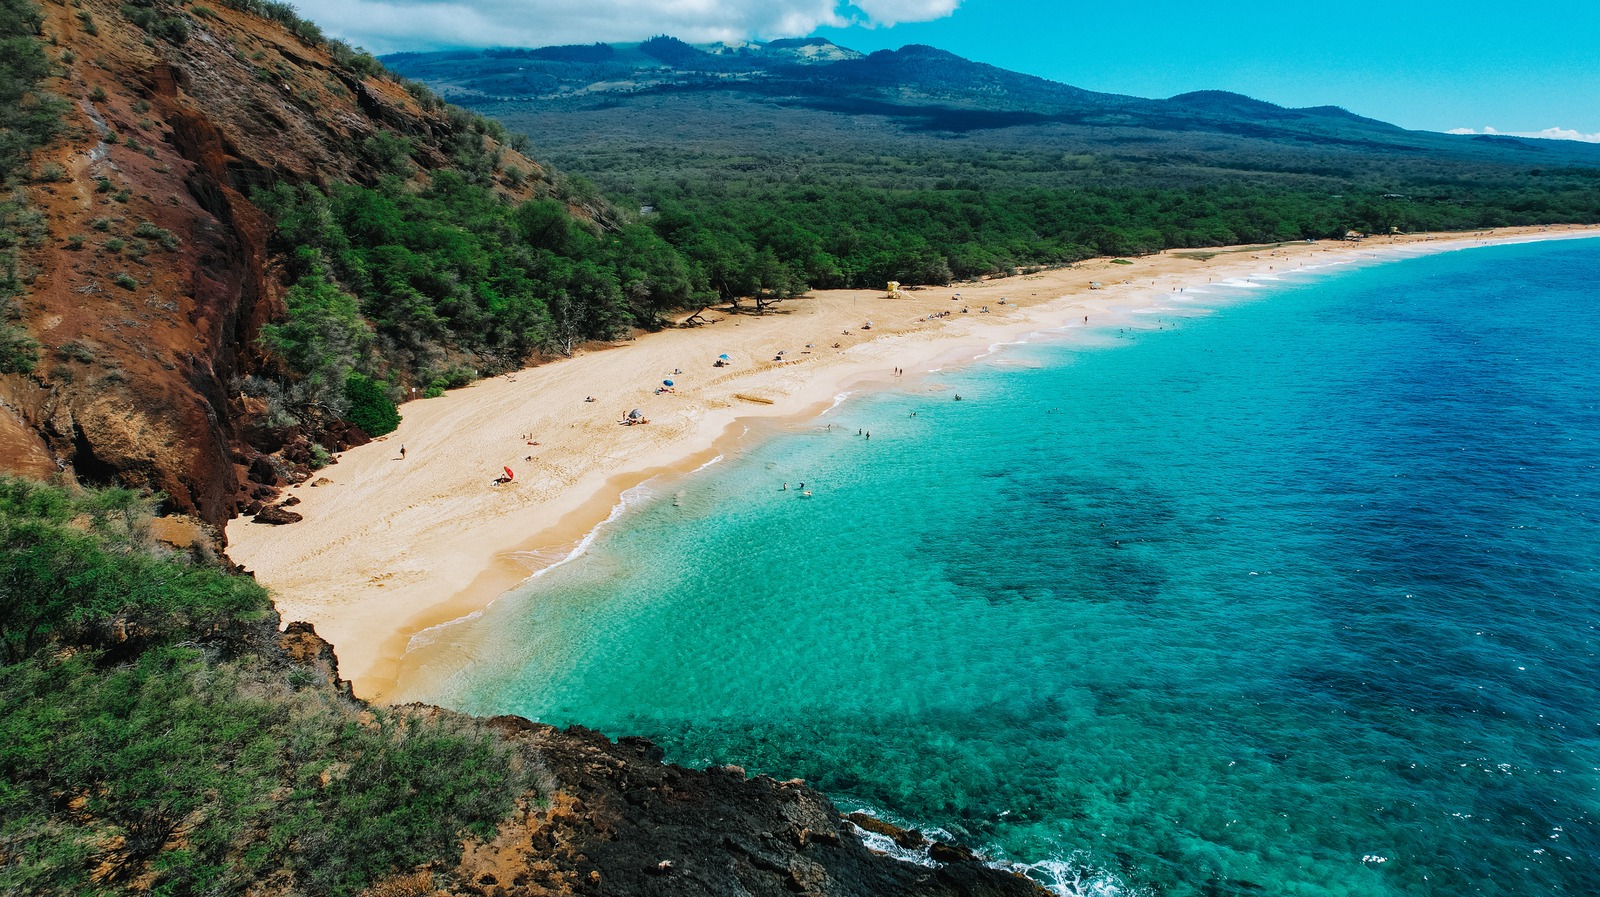 Underrated Attractions That Are Missing From Your Hawaii Bucket List